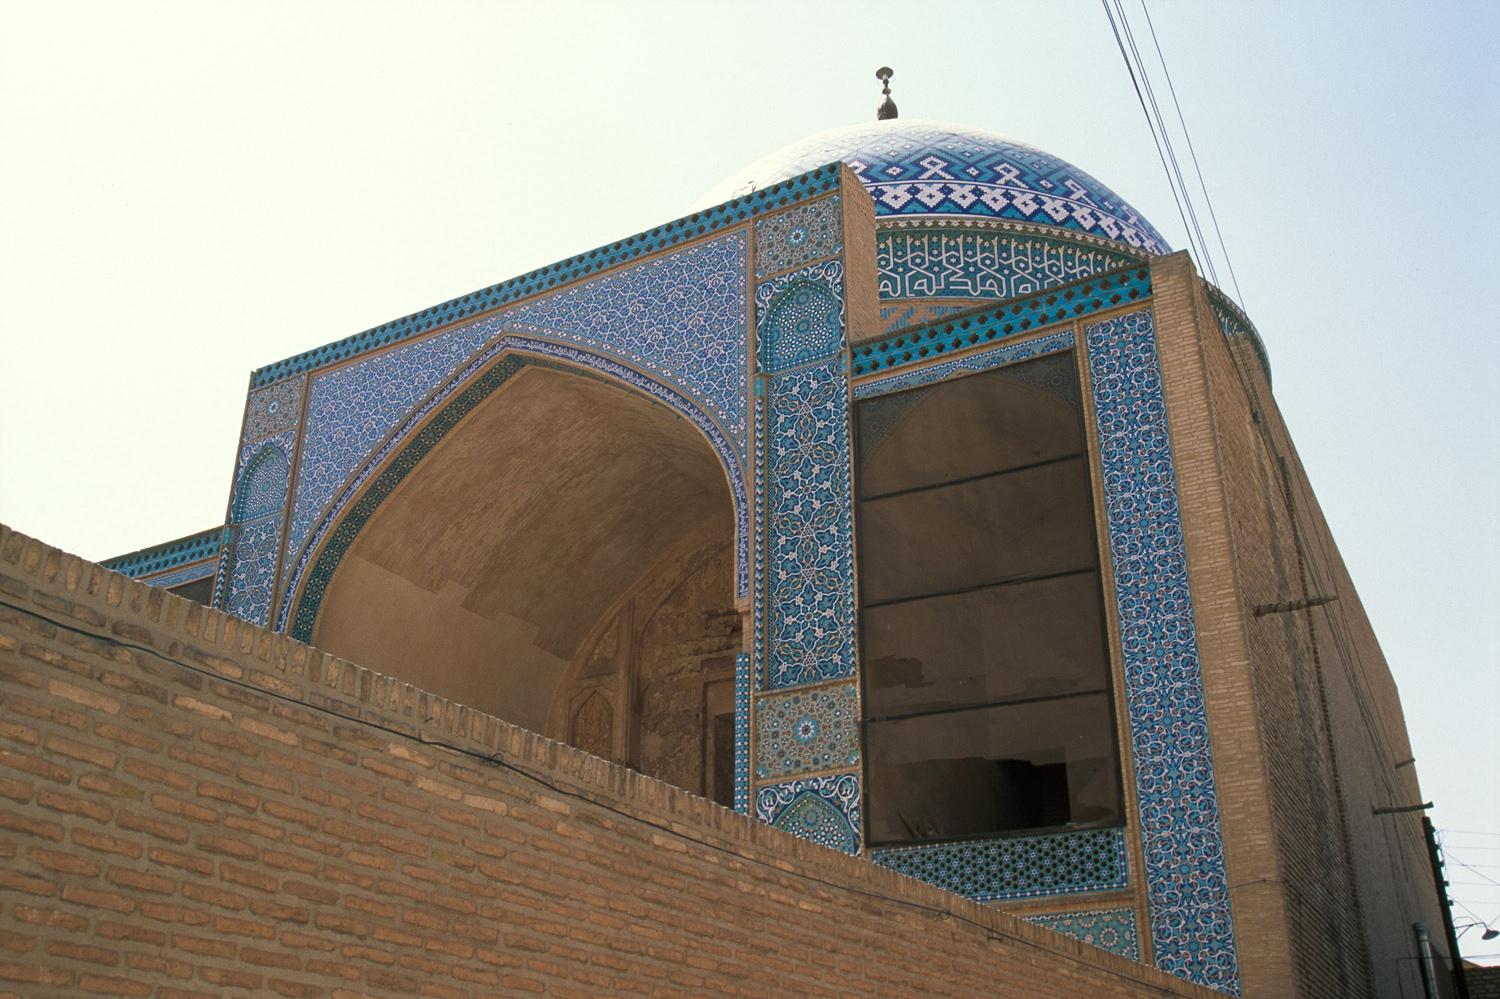 Exterior view of the tomb from the west